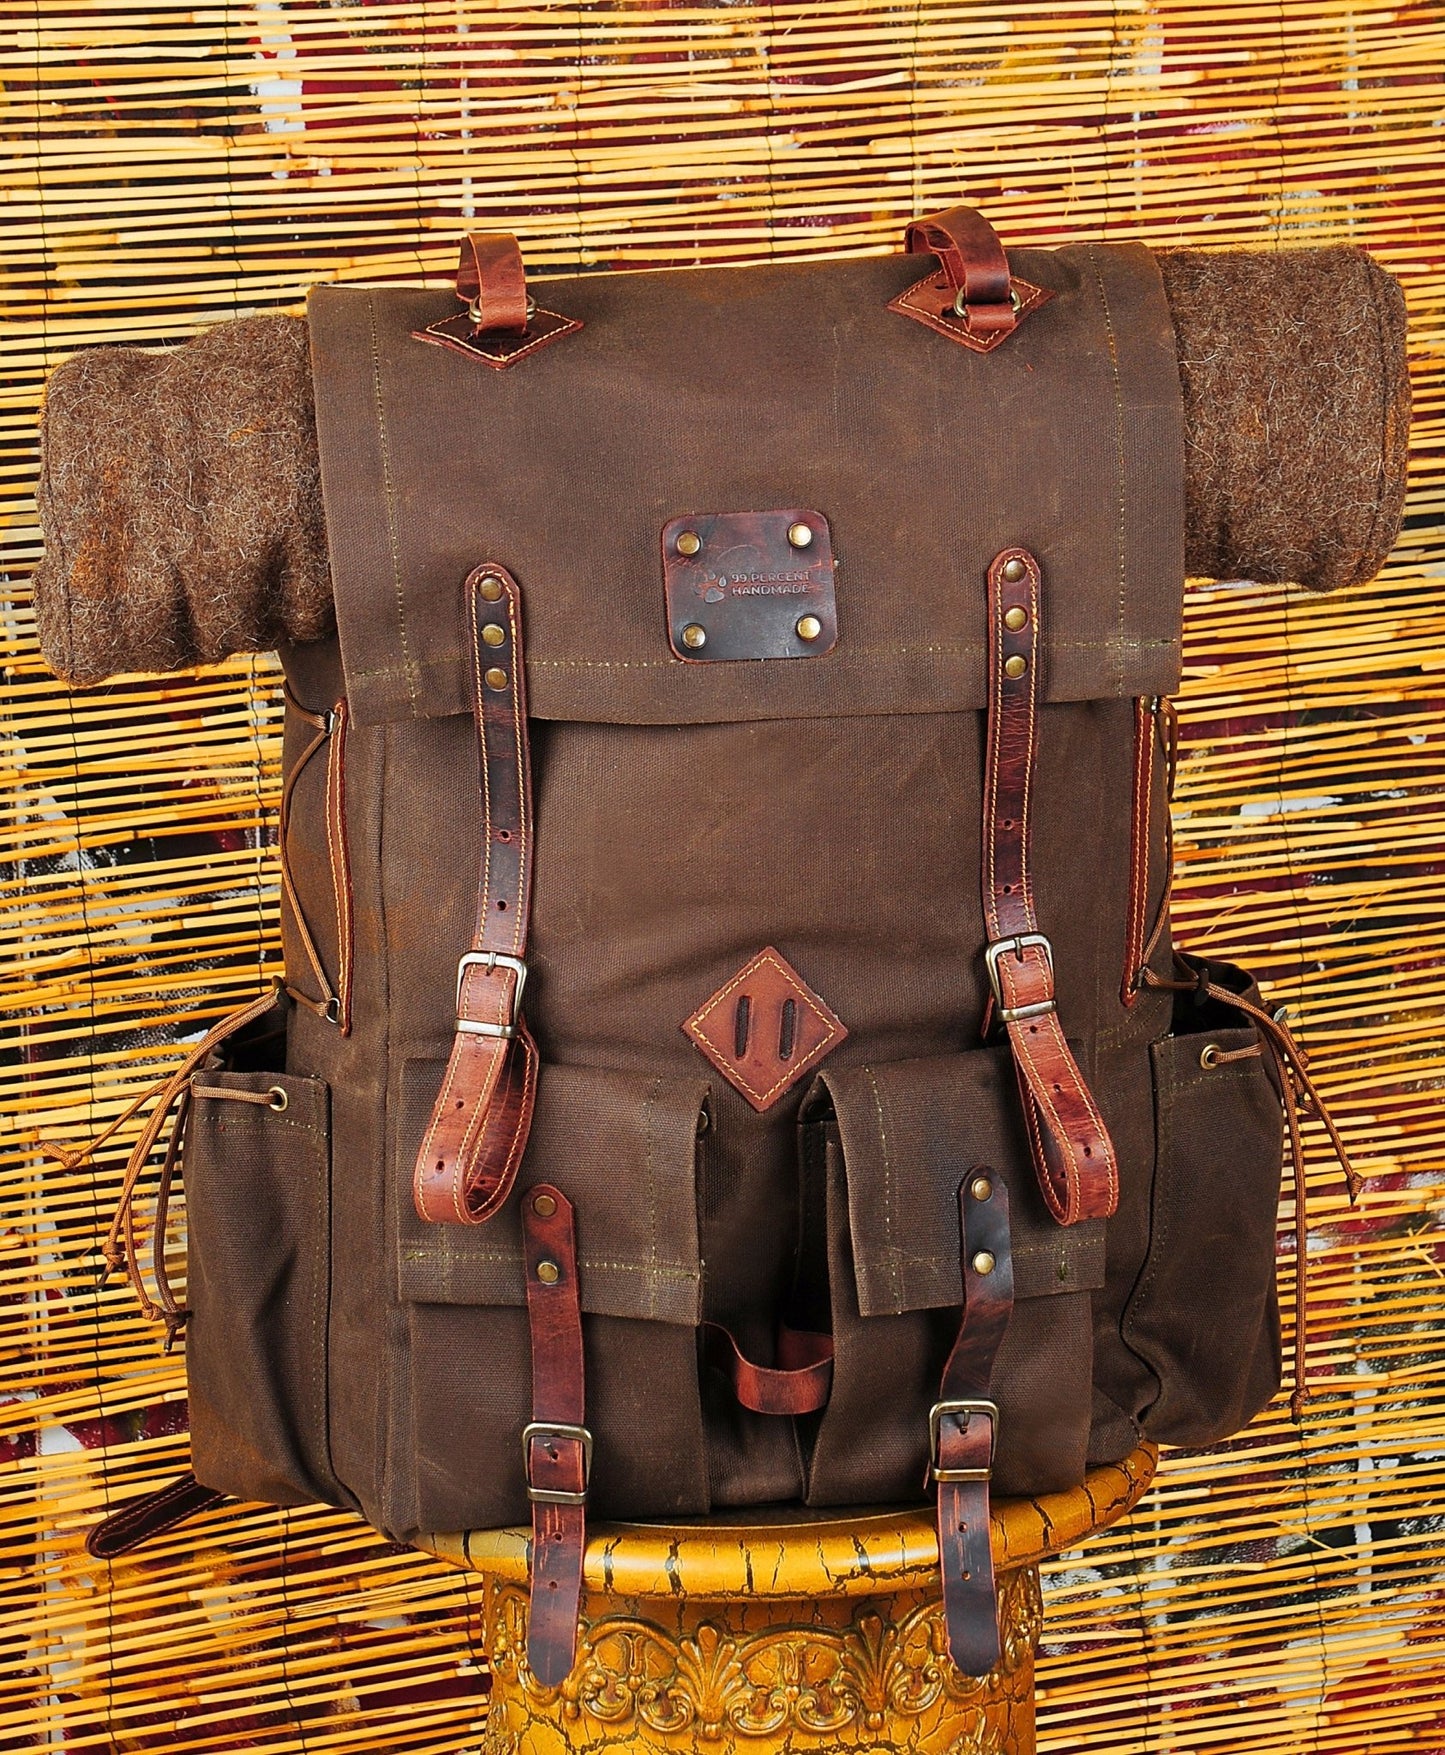 50L | 6 Pieces Left | Green, Brown, Dhaki Colours | Handmade Leather, Waxed Canvas Backpack for Travel, Camping, Bushcraft | Personalization bushcraft - camping - hiking backpack 99percenthandmade 30 Liters Brown Canvas 